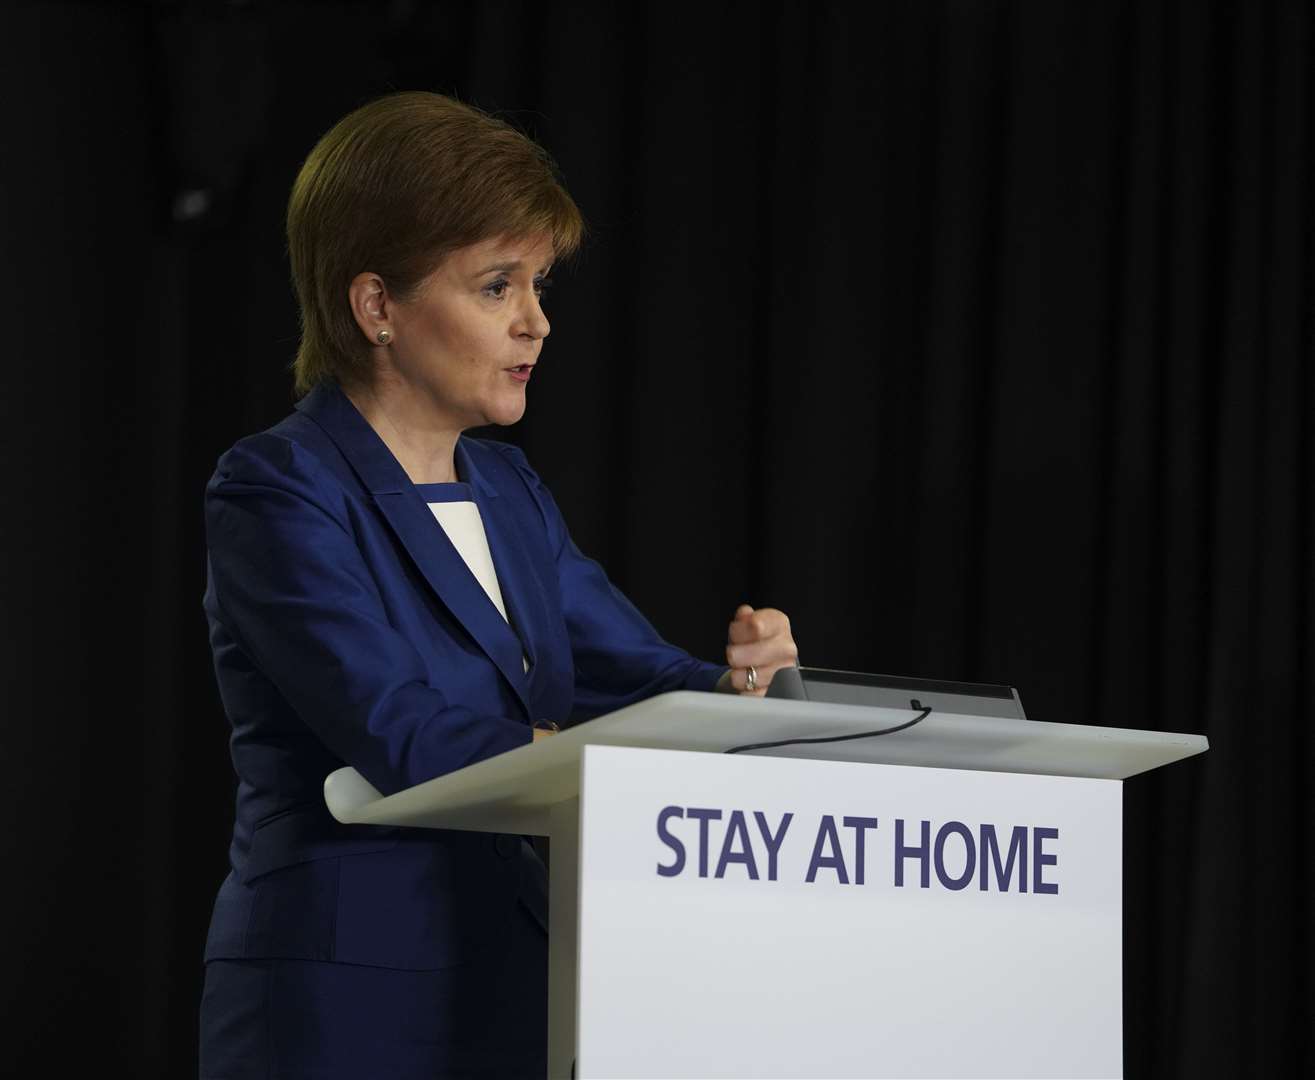 Nicola Sturgeon said there was evidence that places such as pubs and gyms can be 'hotspots' for virus transmission.